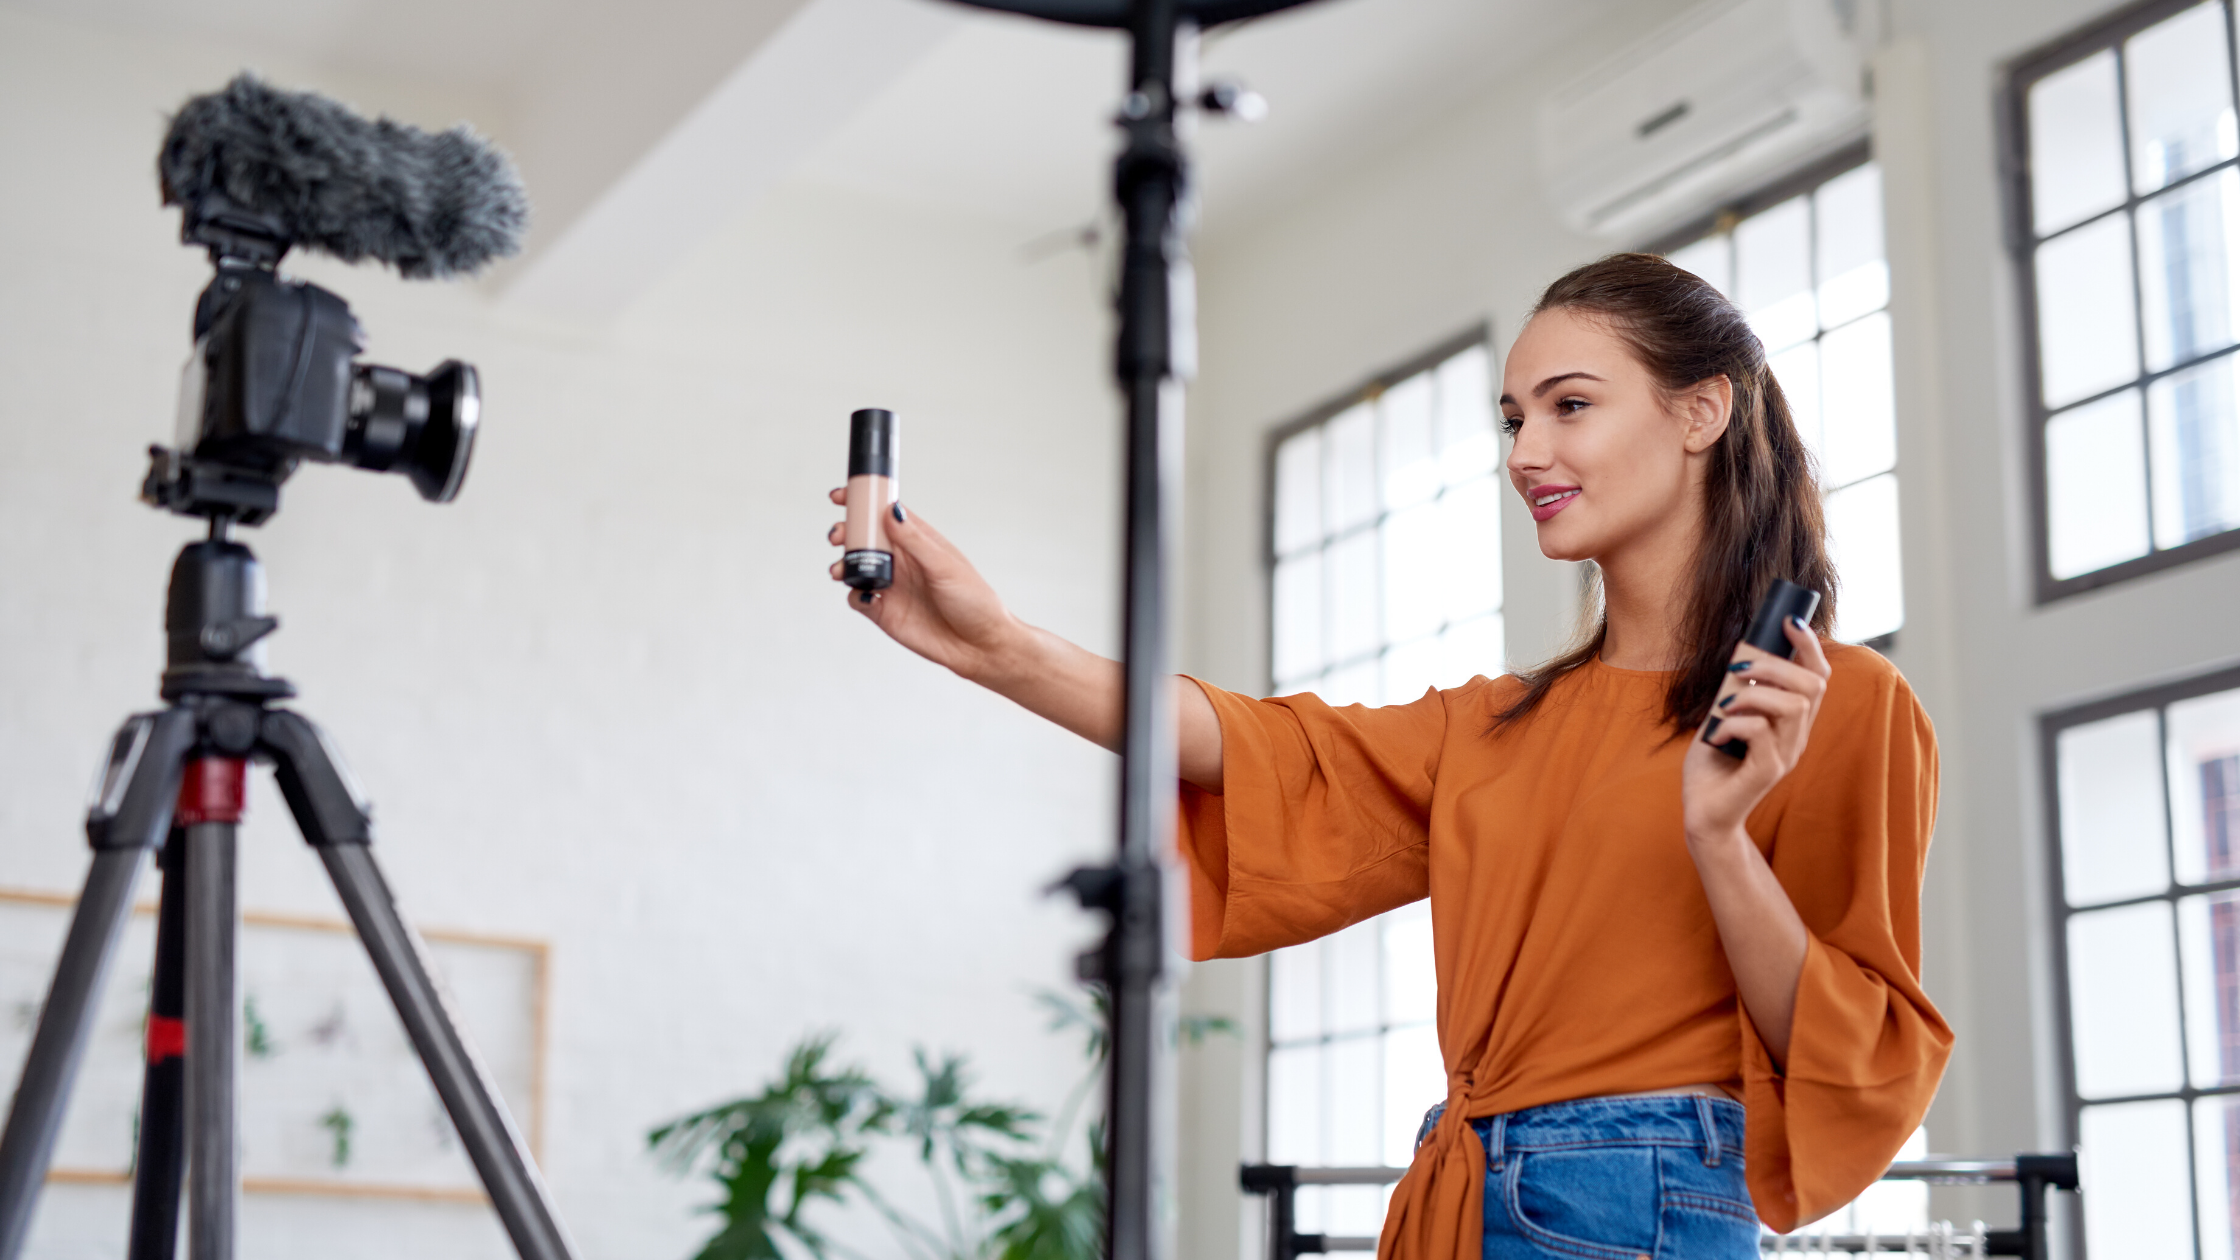 How to get the most reach for your video